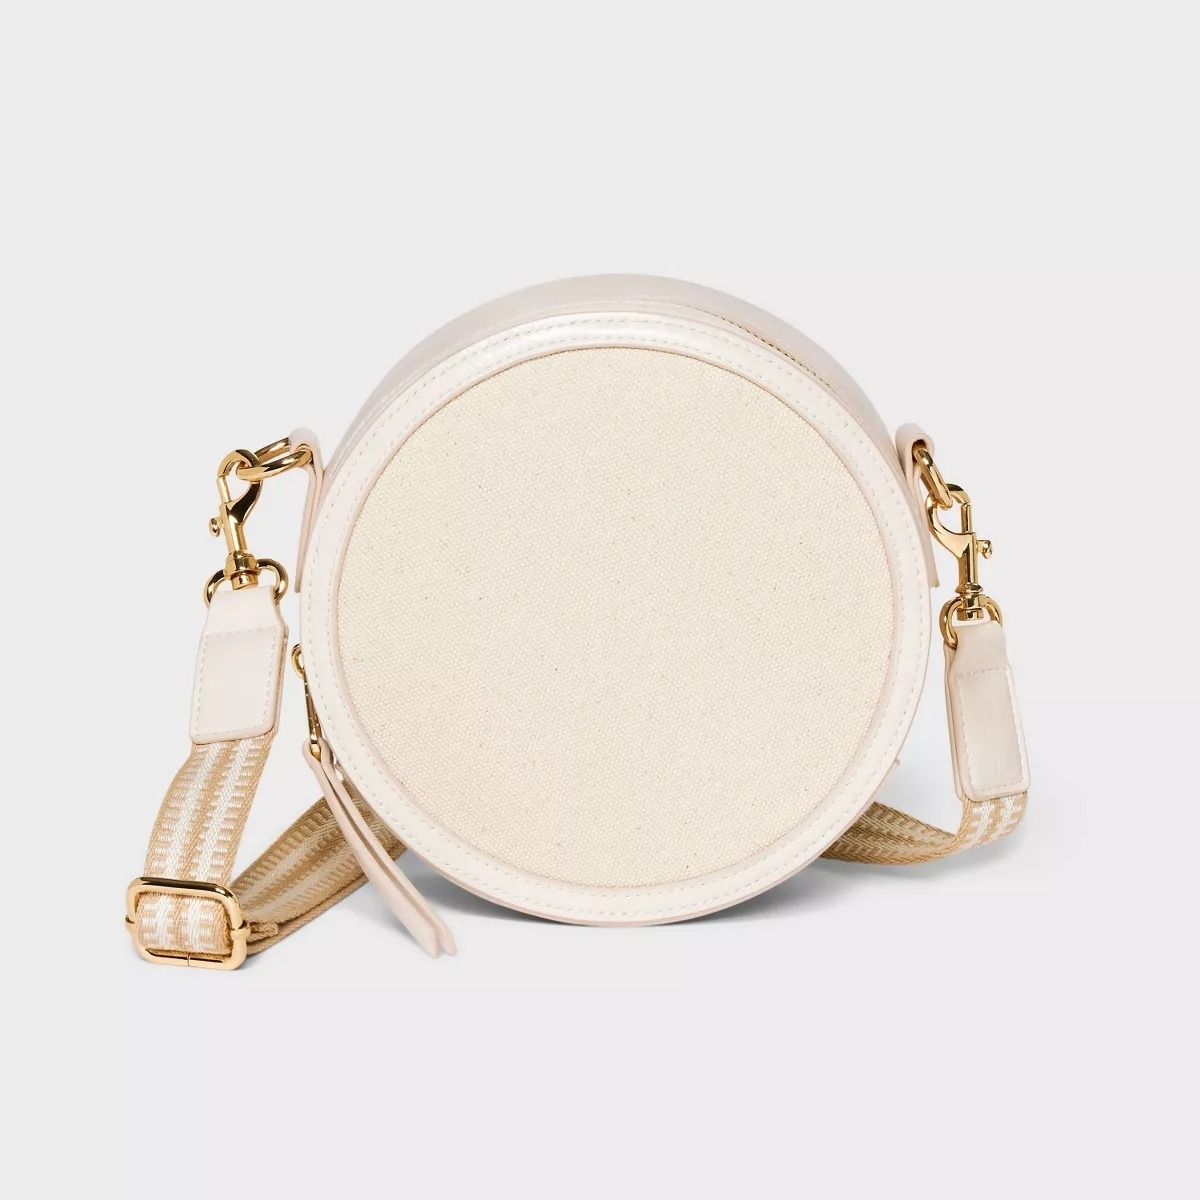 Round white fabric crossbody bag with a gold-toned strap buckle